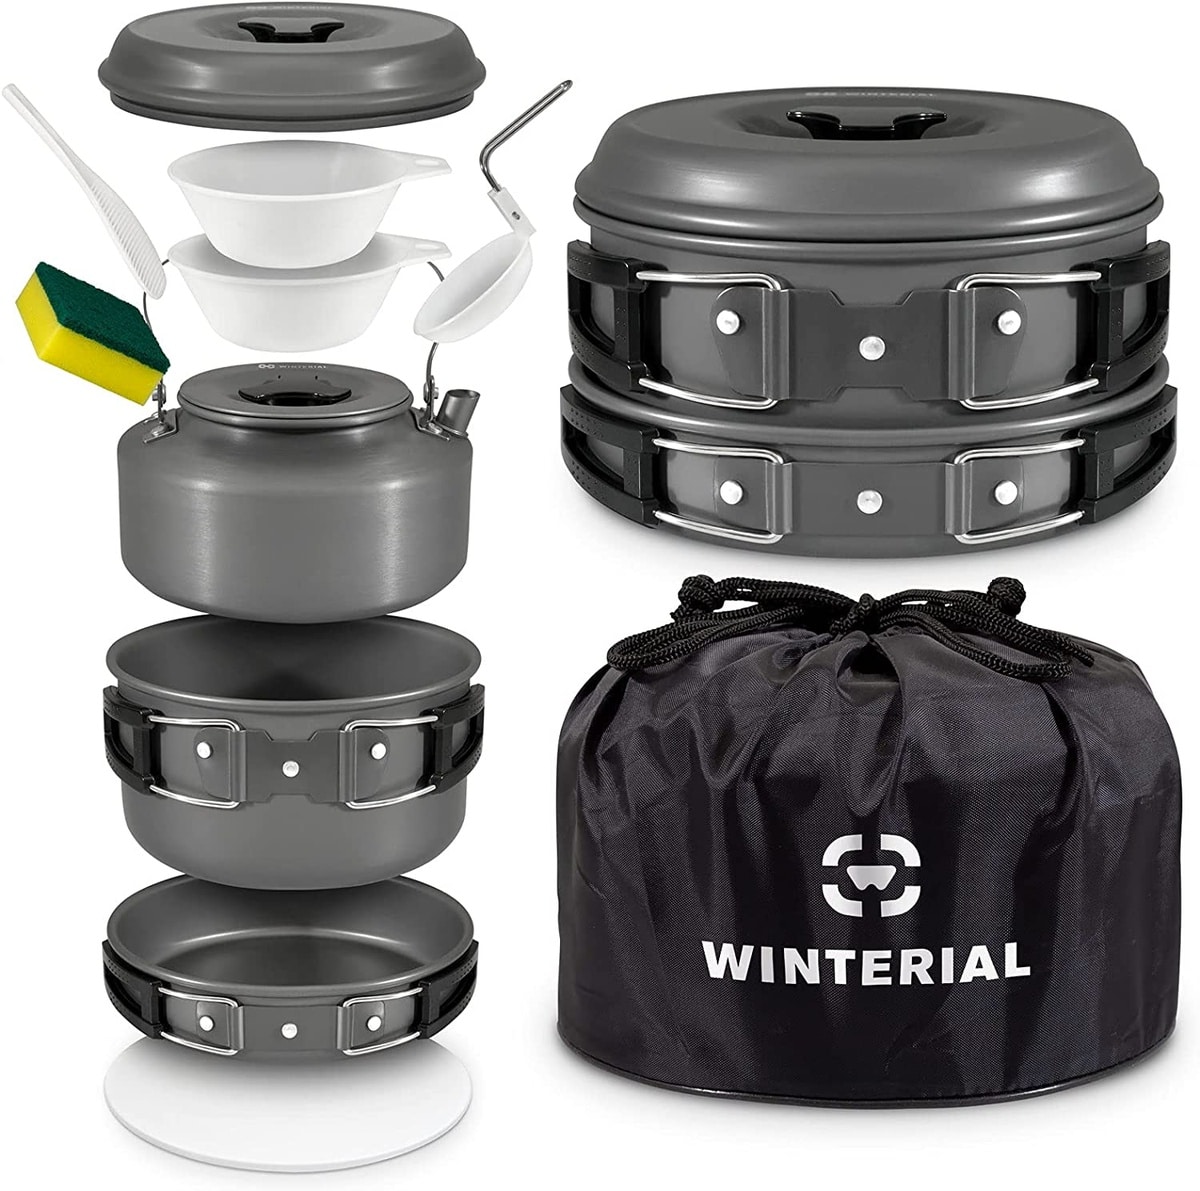 Winterial camping cookware and pot set